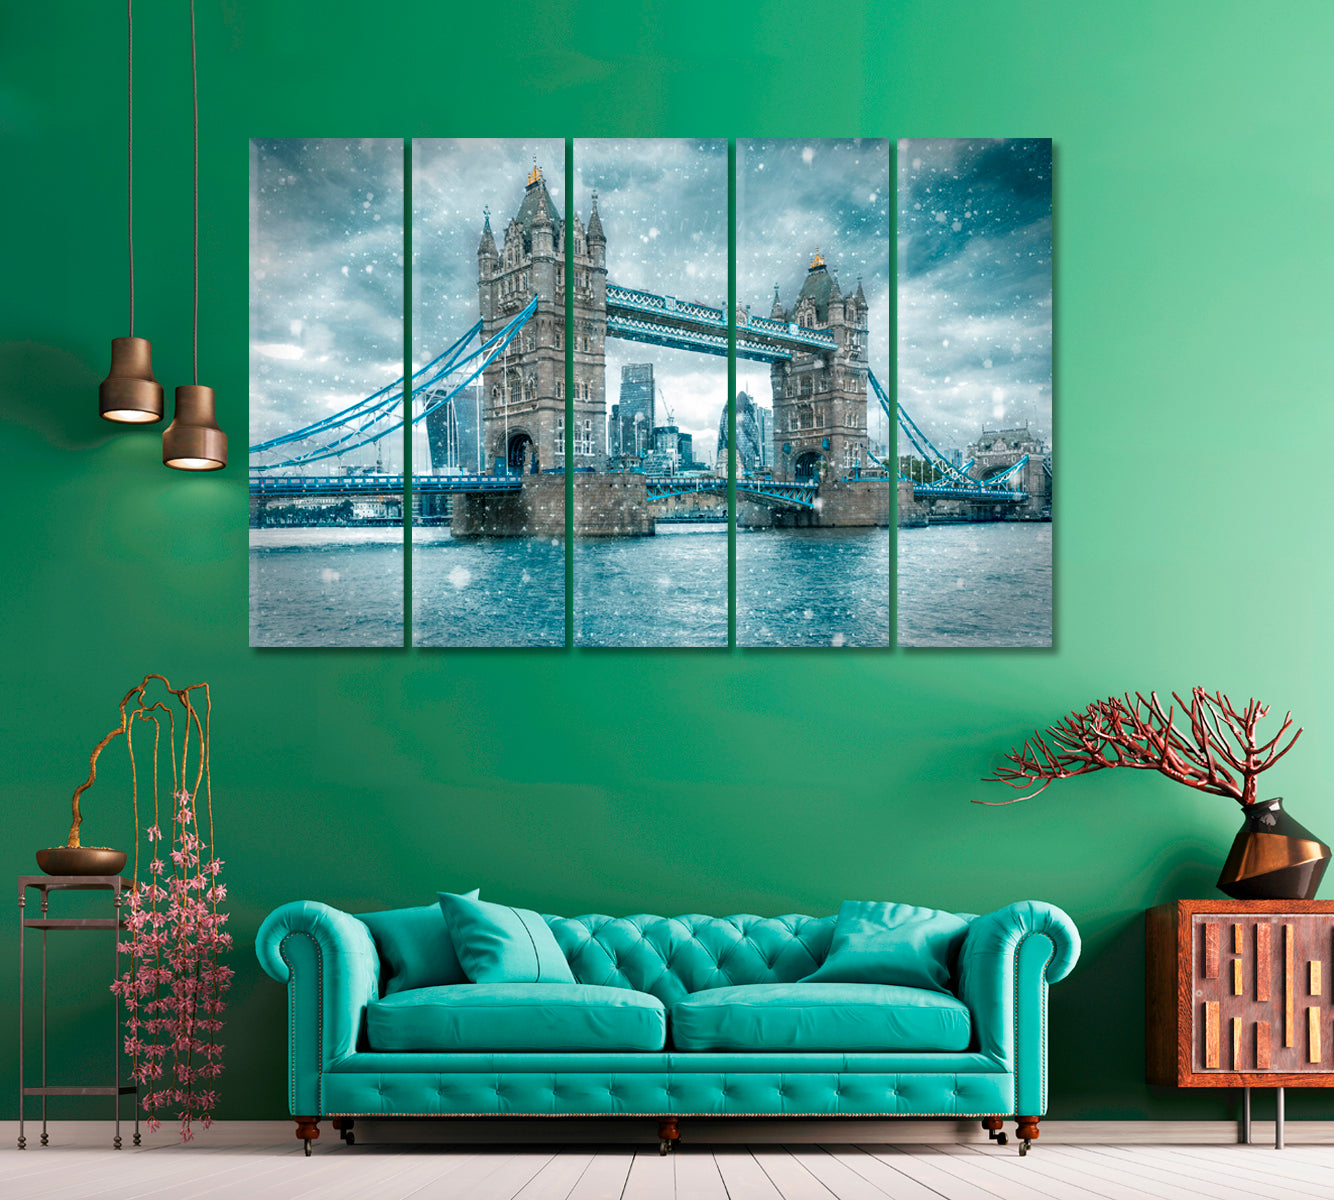 London Tower Bridge in Winter Canvas Print ArtLexy 5 Panels 36"x24" inches 